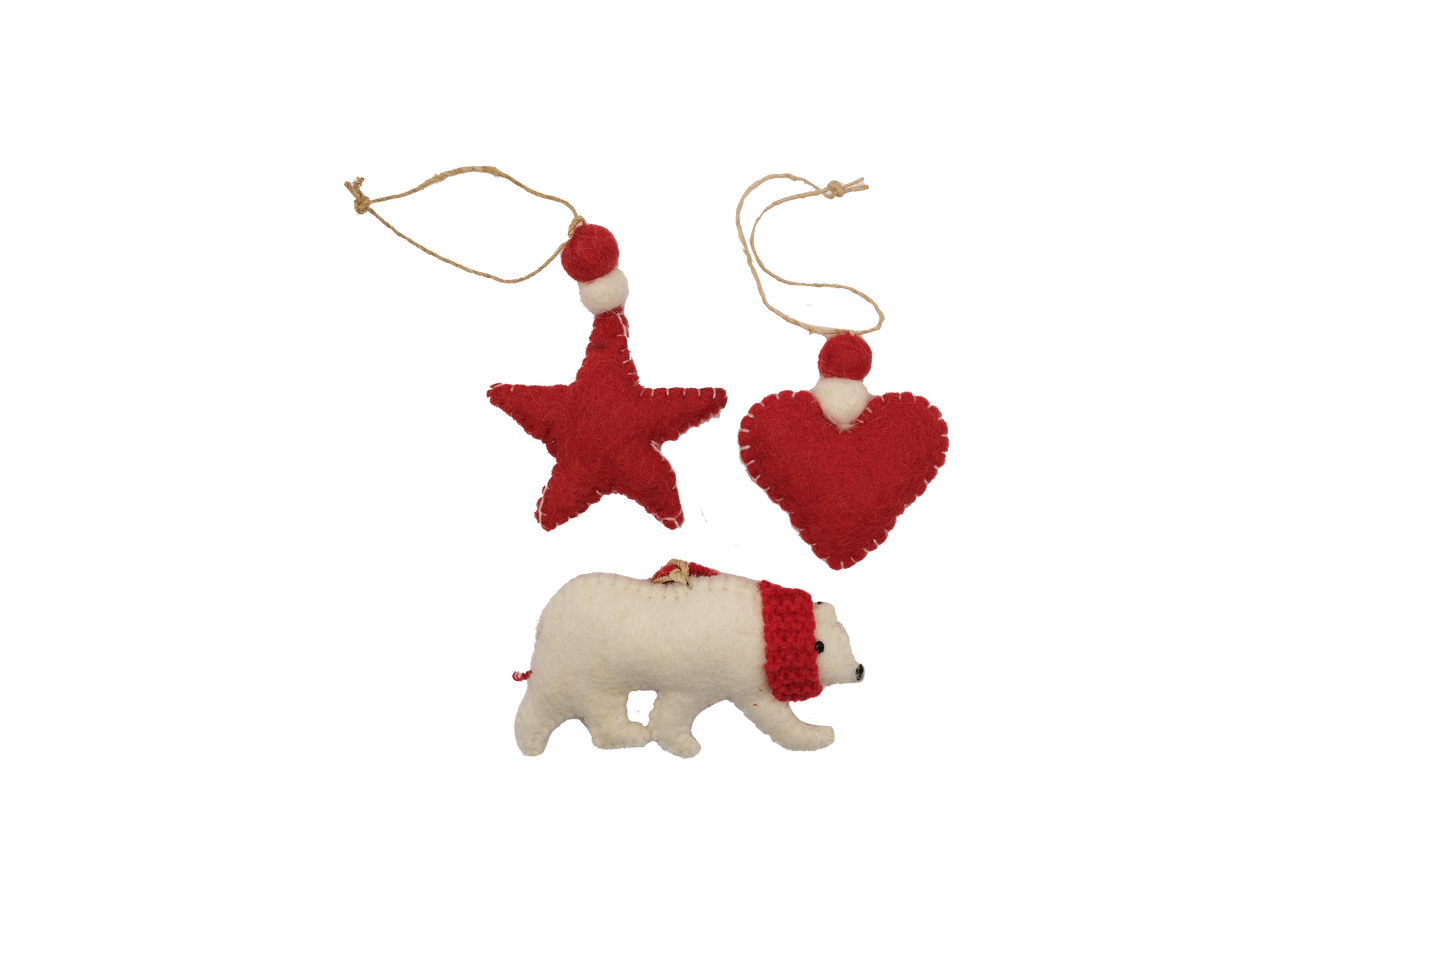 This Global Groove Life, handmade, ethical, fair trade, eco-friendly, sustainable, red and white, Polar Bear, heart and star felt ornament set was created by artisans in Kathmandu Nepal and will be a beautiful and fun addition to your Christmas tree this holiday season.